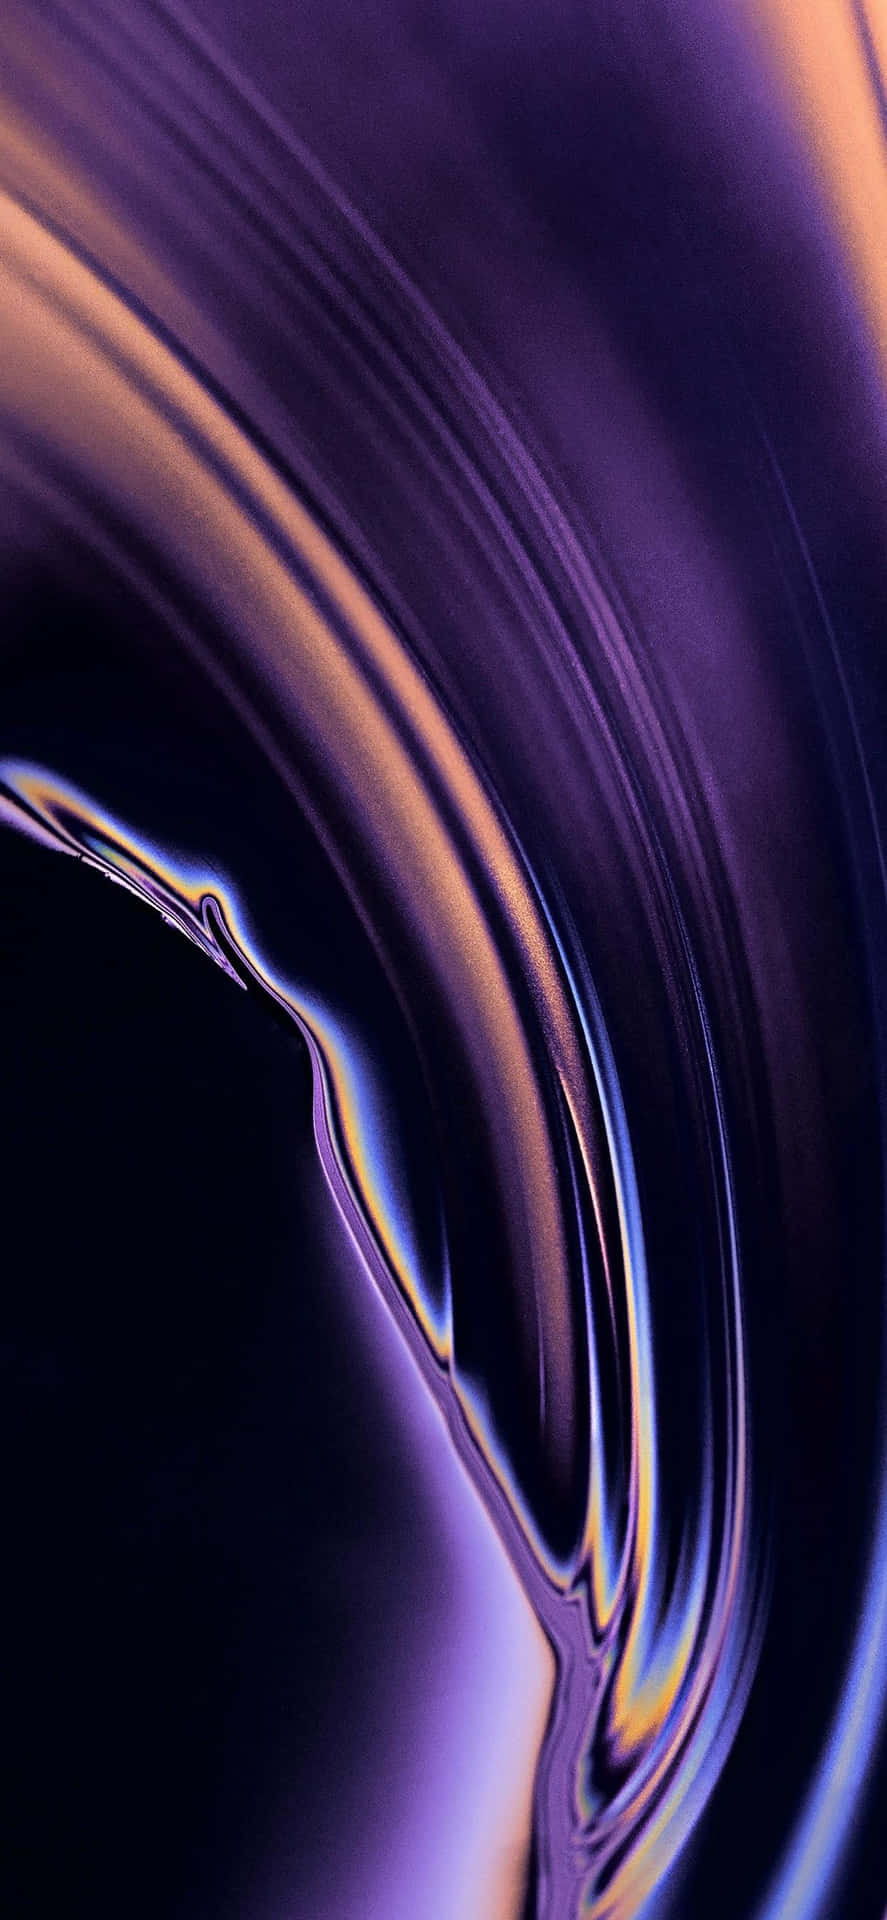 Glossy Purple Iphone X Abstract Wallpaper